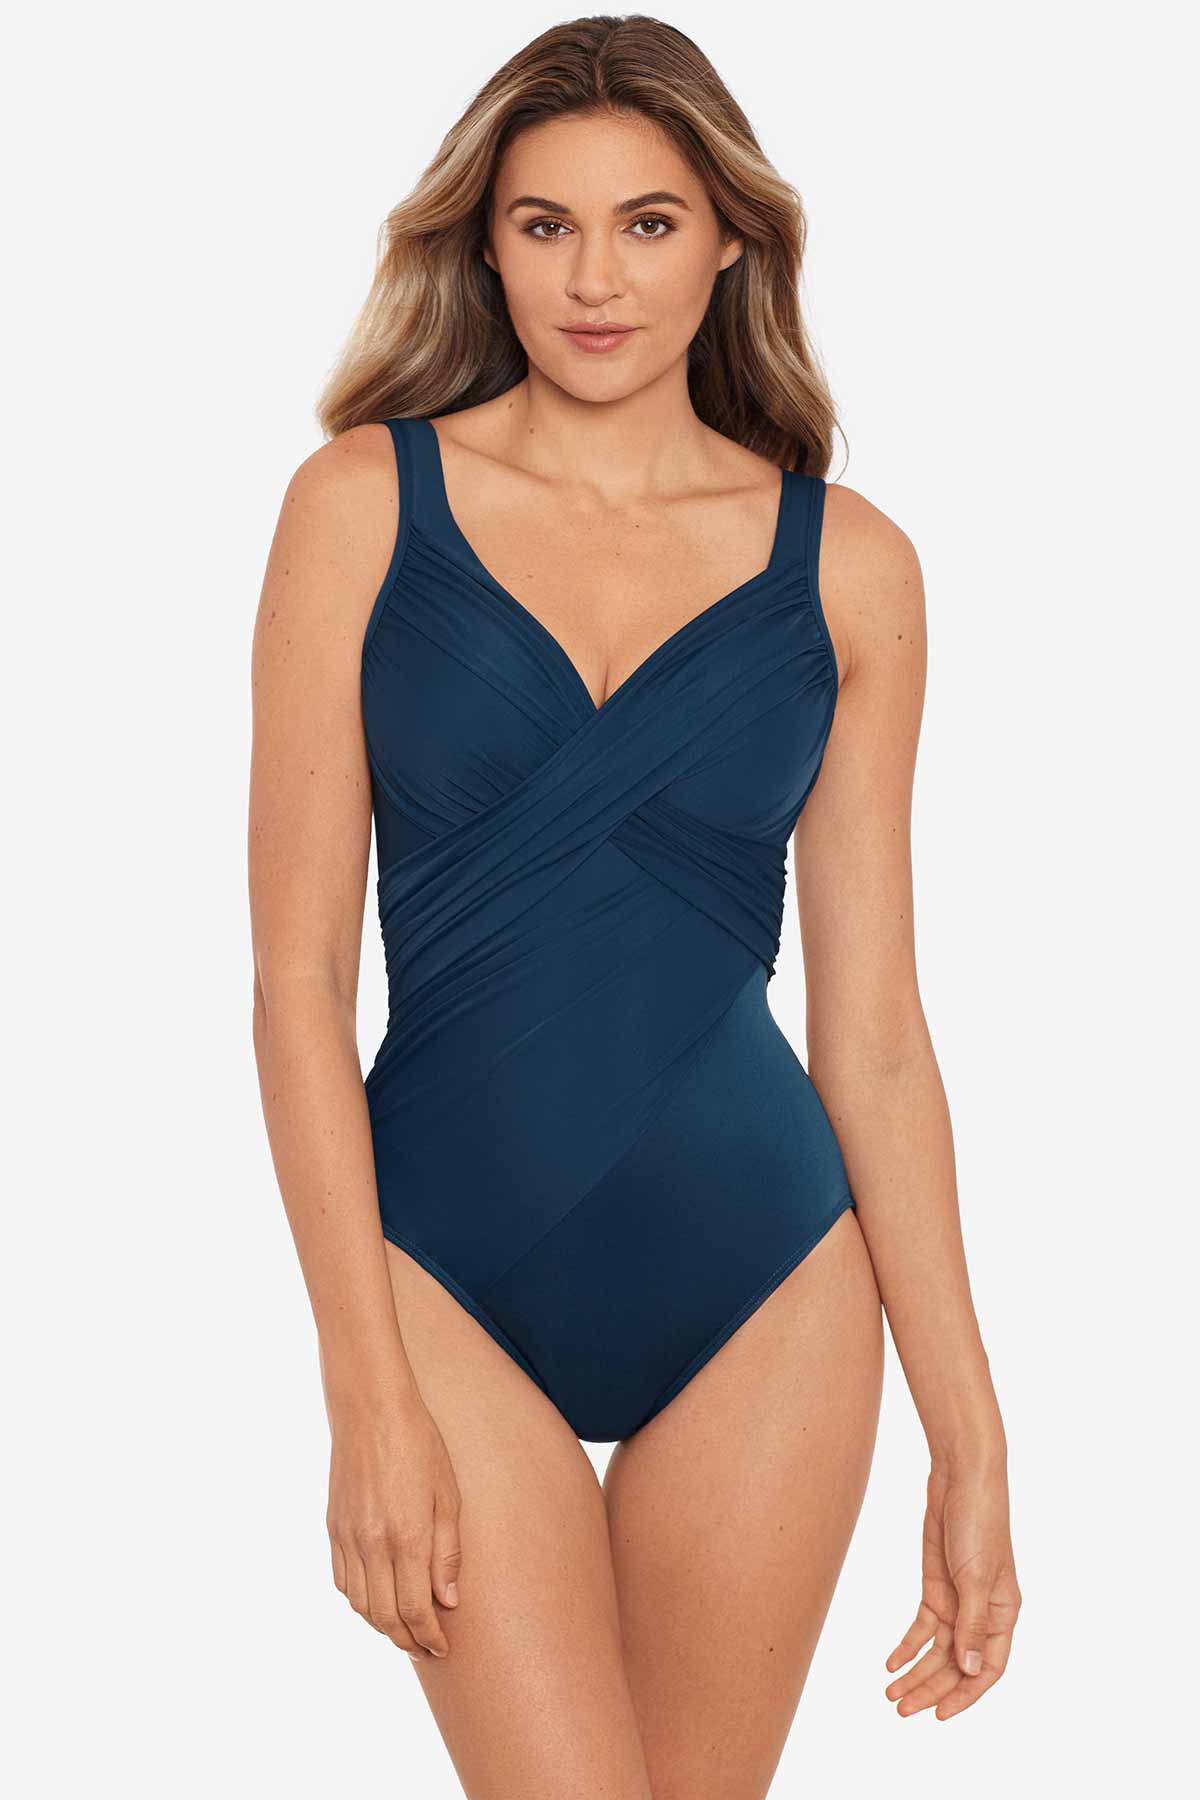 MIRACLESUIT NEW DIRECTIONS MUSE UNDERWIRE ONE PIECE SWIM SUIT BLUE 10 NEW!  $180